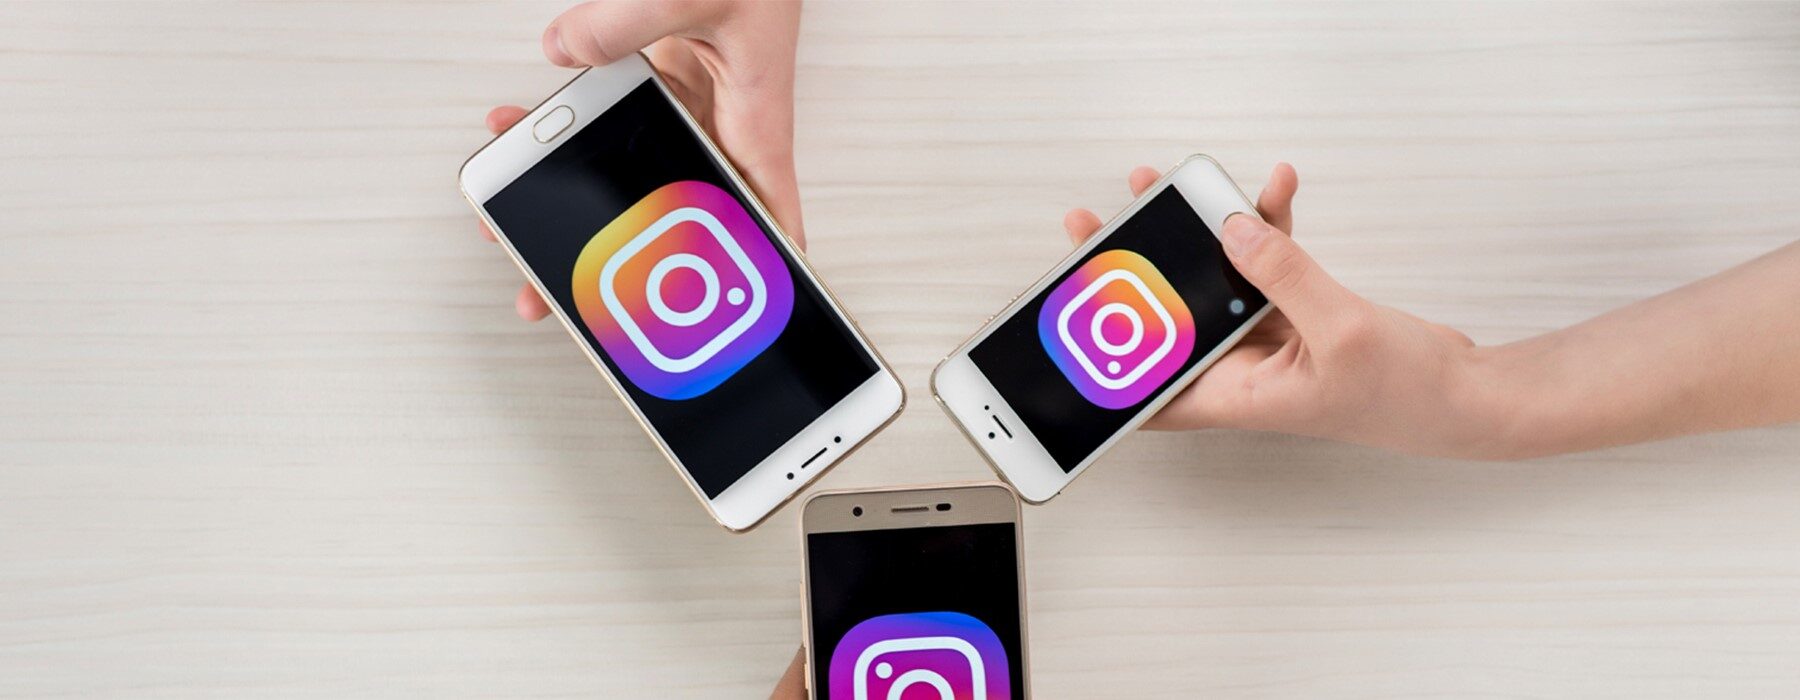 09 Instagram Photo Sharing to expand into new fields